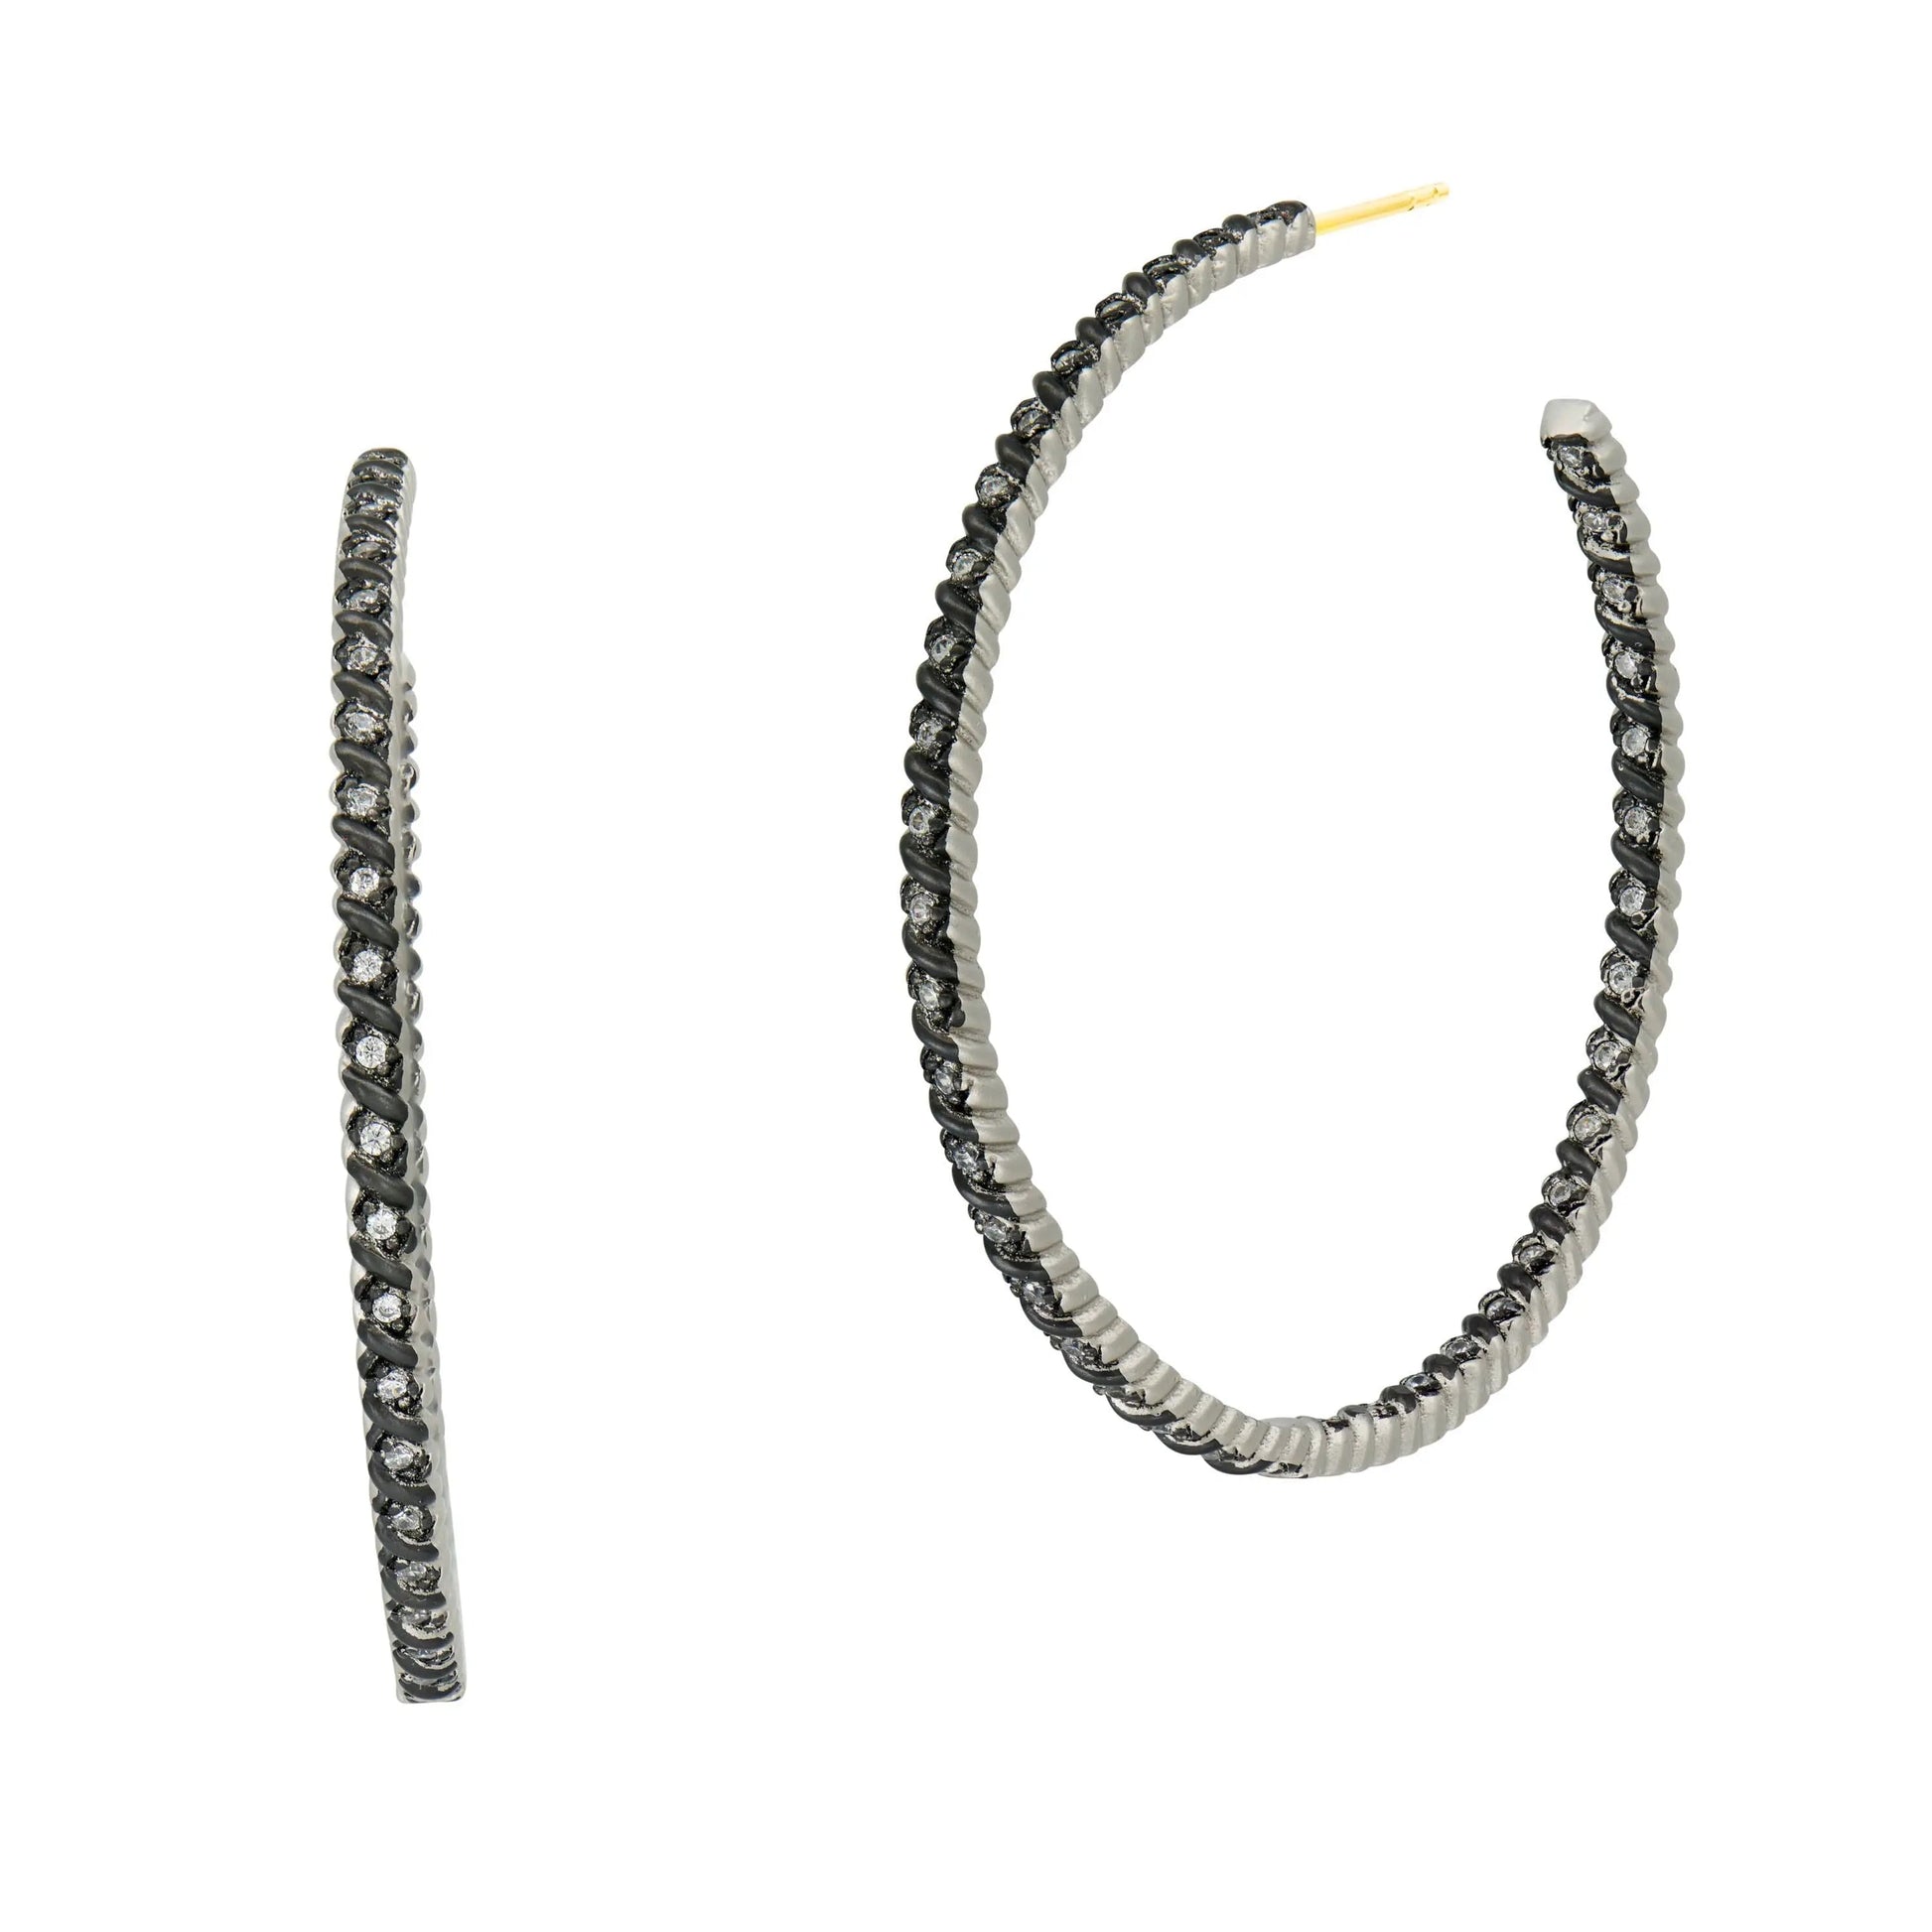  Twisted Cable Hoop Earring FR Vault EARRING